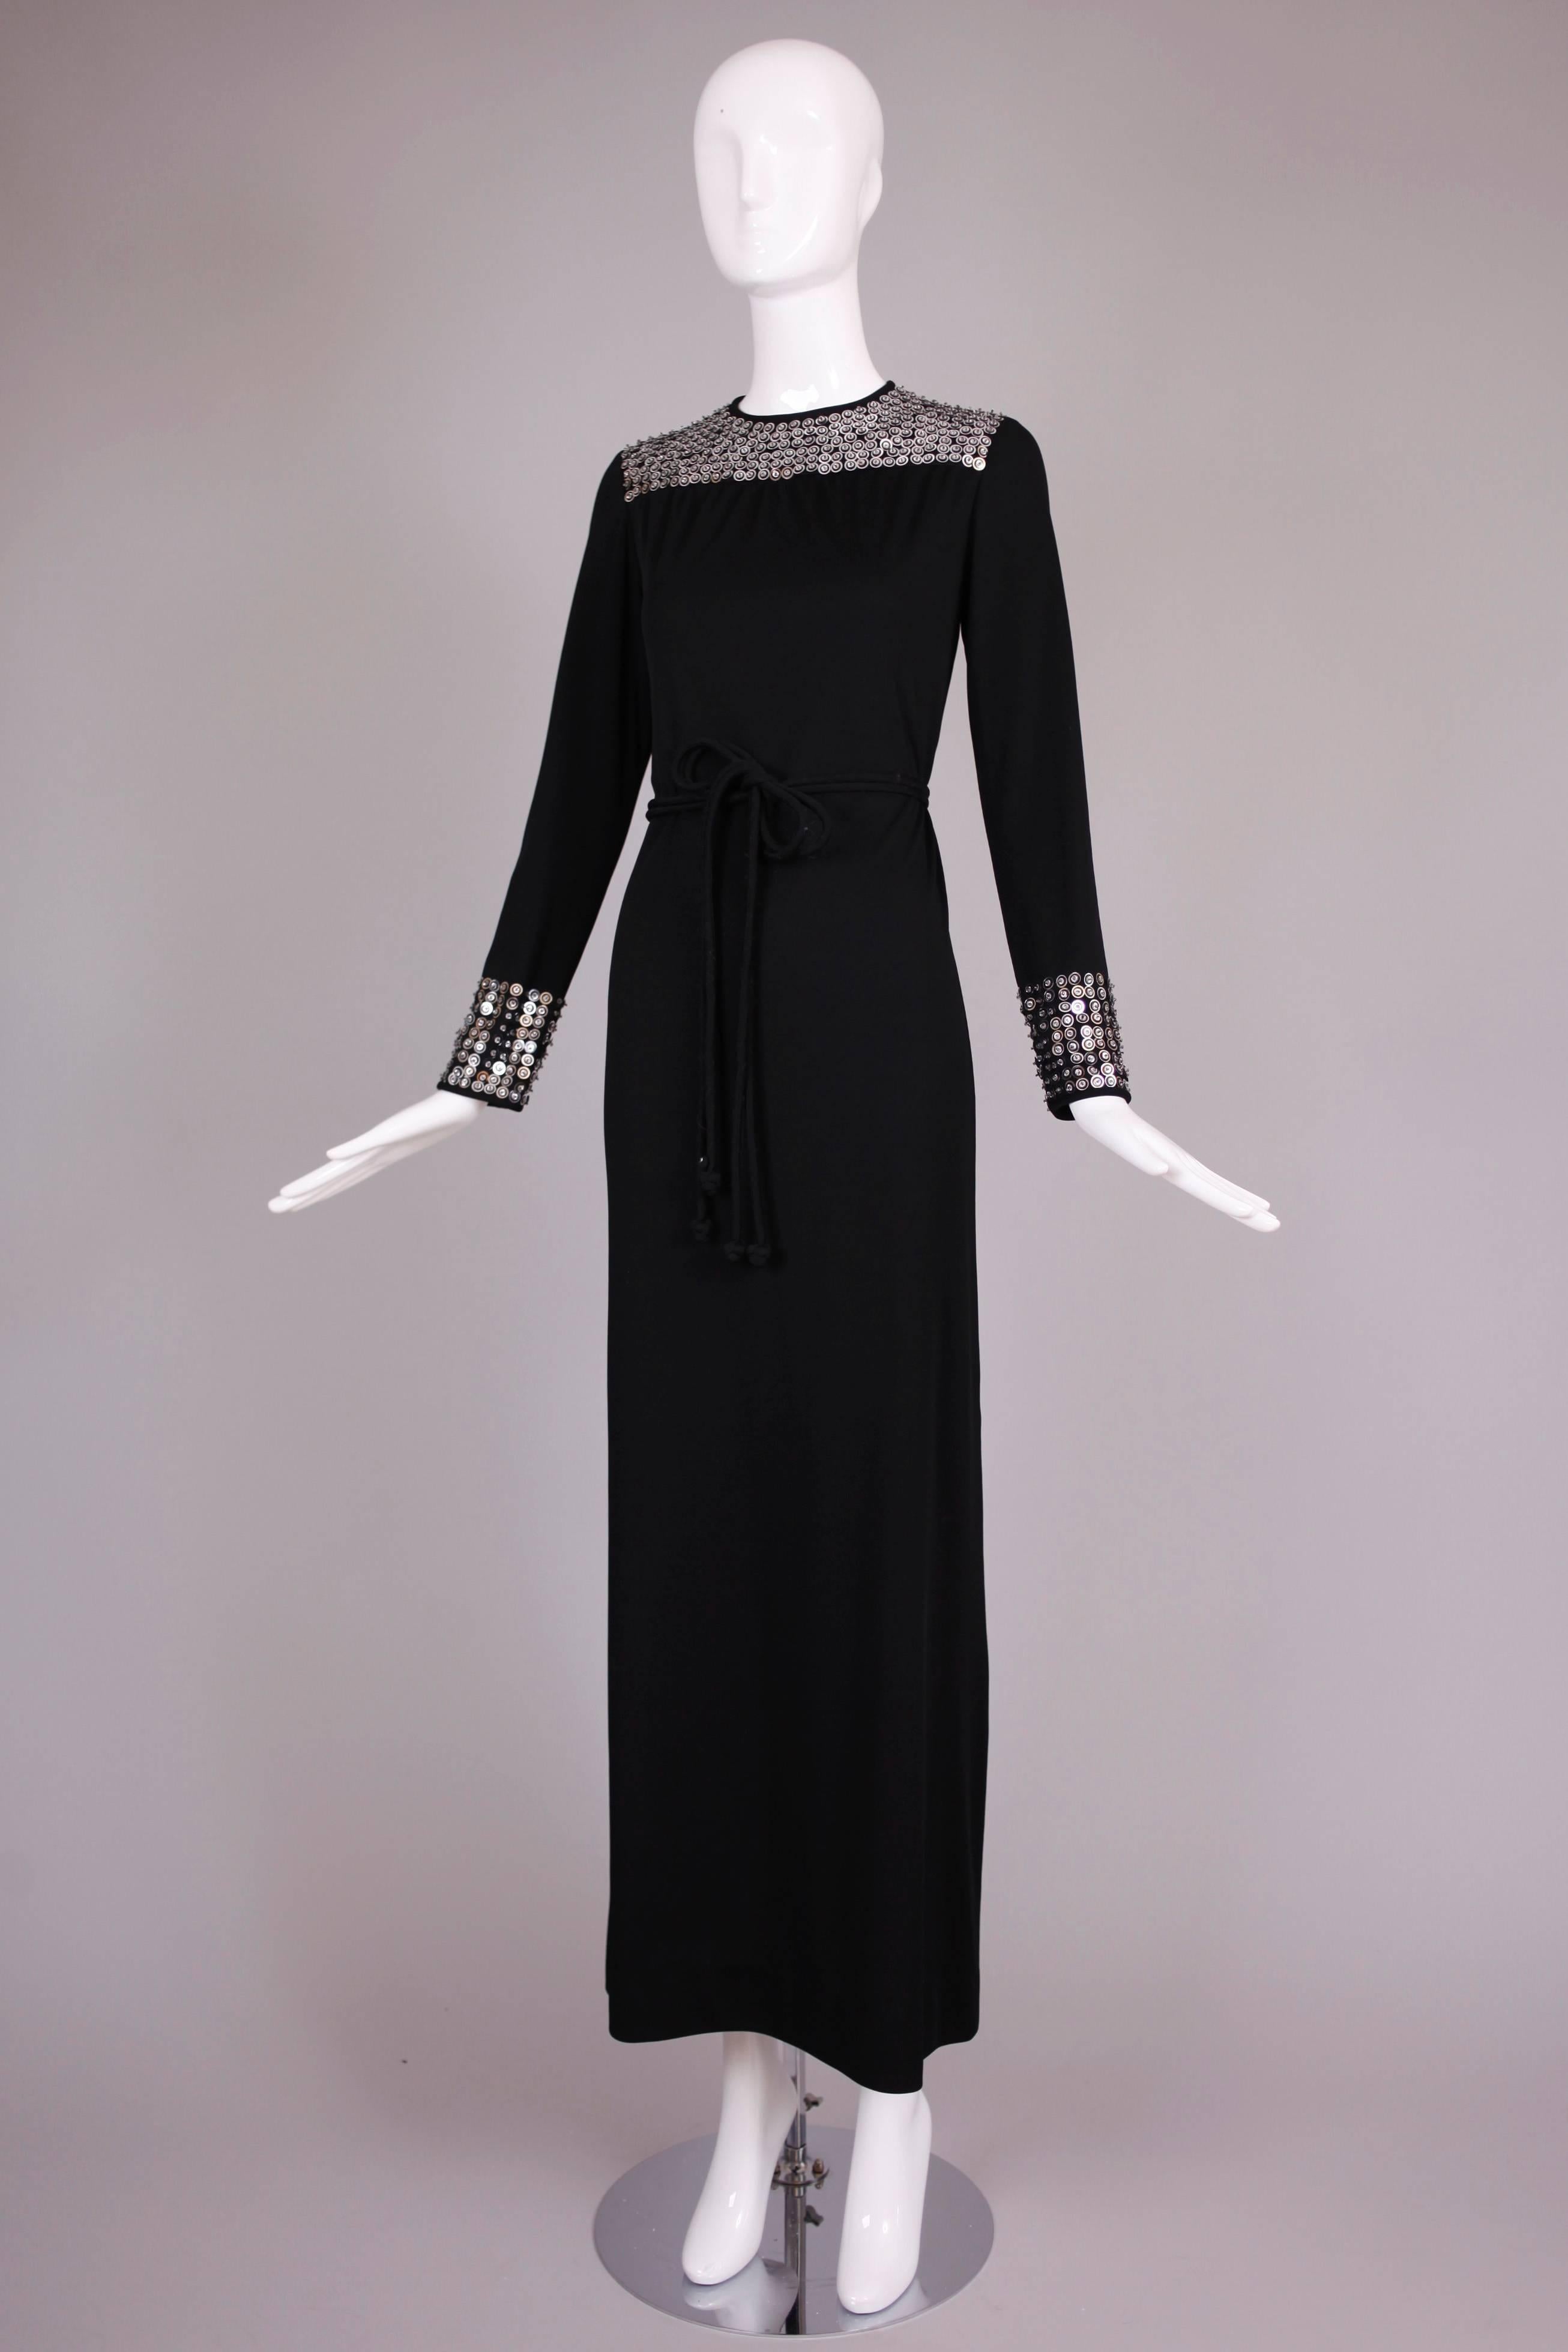 1970's Rizkallah for Malcolm Starr black evening dress with silver beaded & sequined detail at the neck and sleeves - comes with self-tie belt. In excellent condition - missing a few sequins. No size tag so please consult